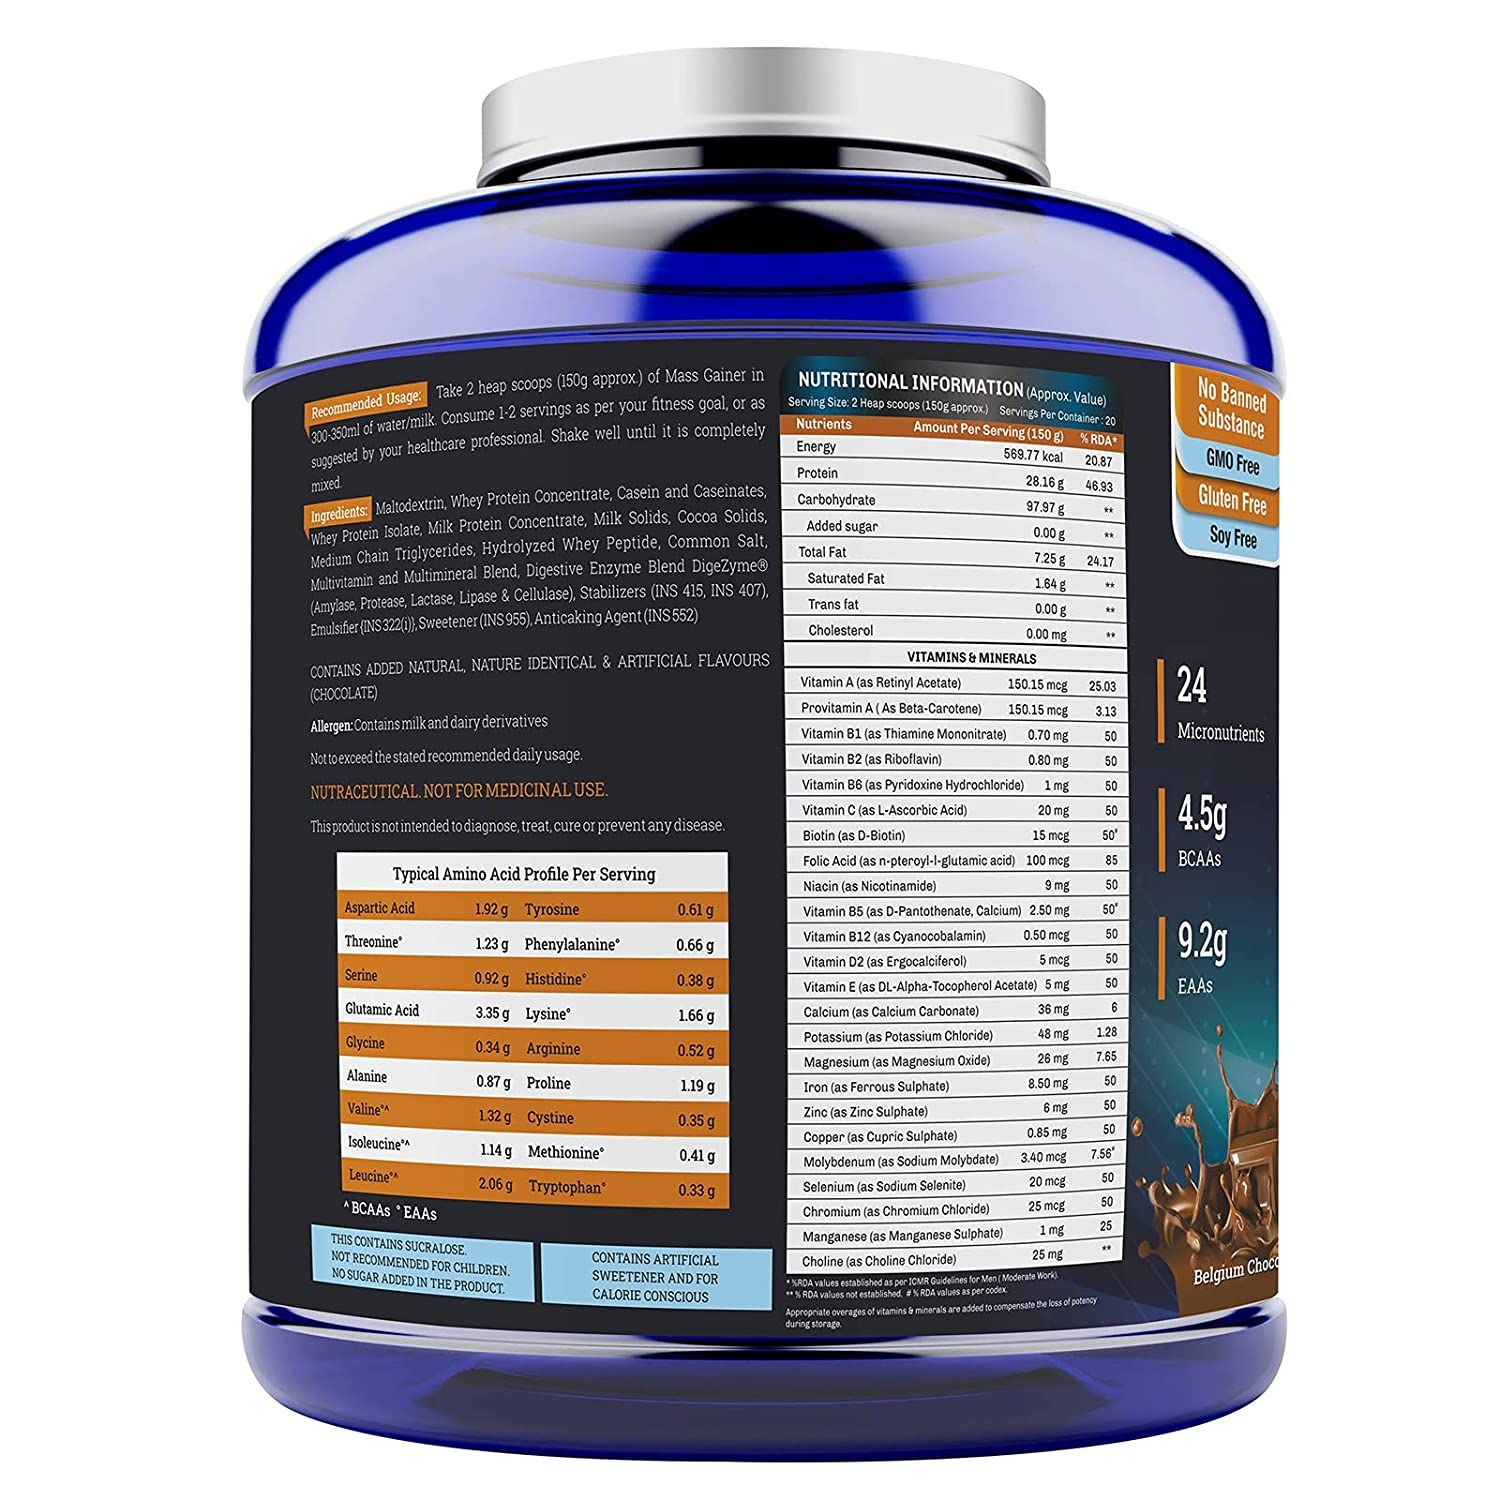 Onelife Mass Gainer Image